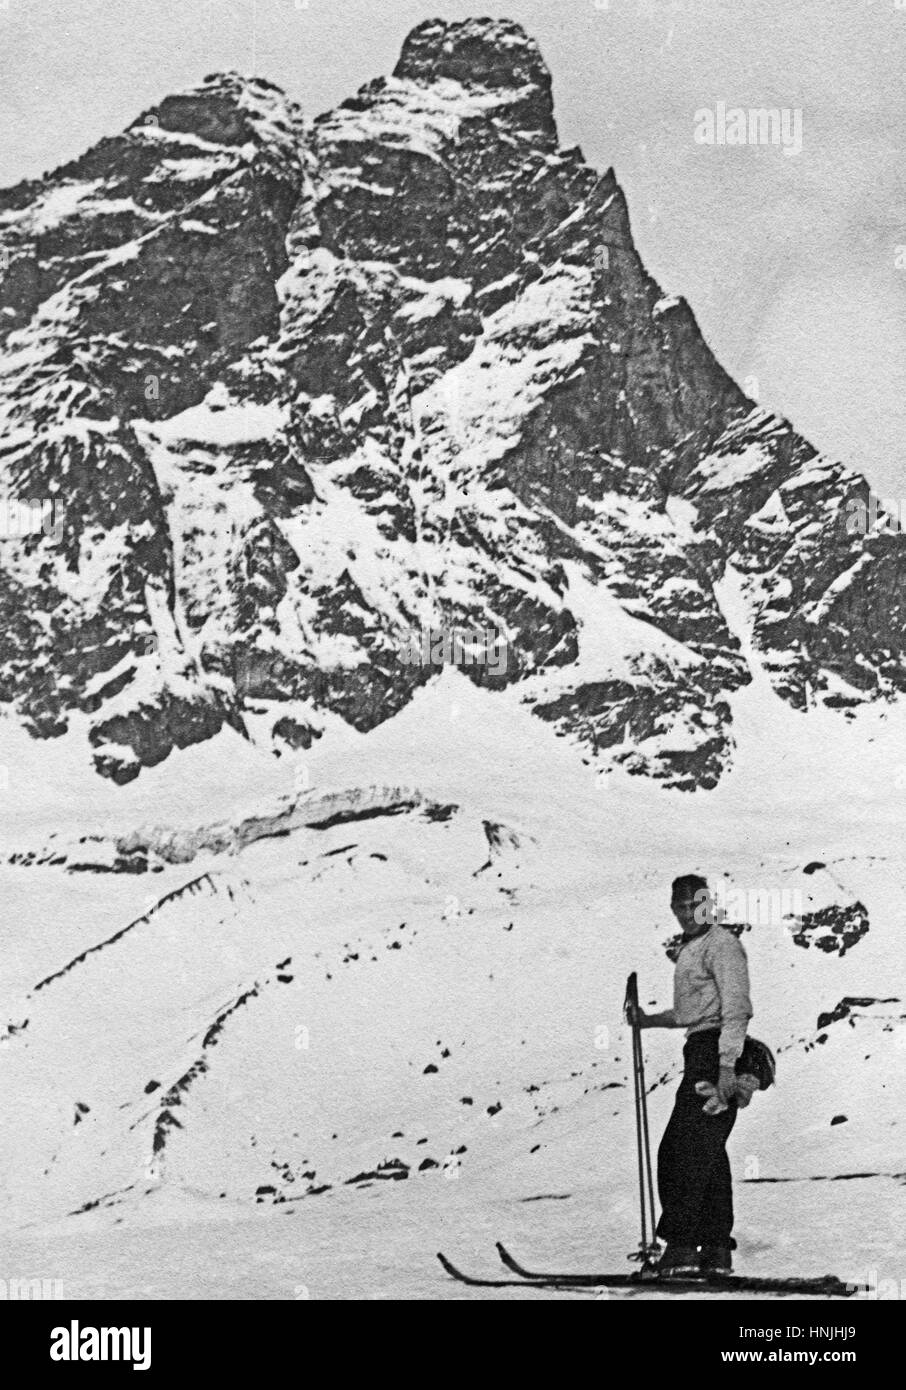 Cortina, Italy - 1939 -Vintage portrait of a skier with a beautiful mountain winter panorama behind. Scan from analog photography, private family collection before WWII. Stock Photo